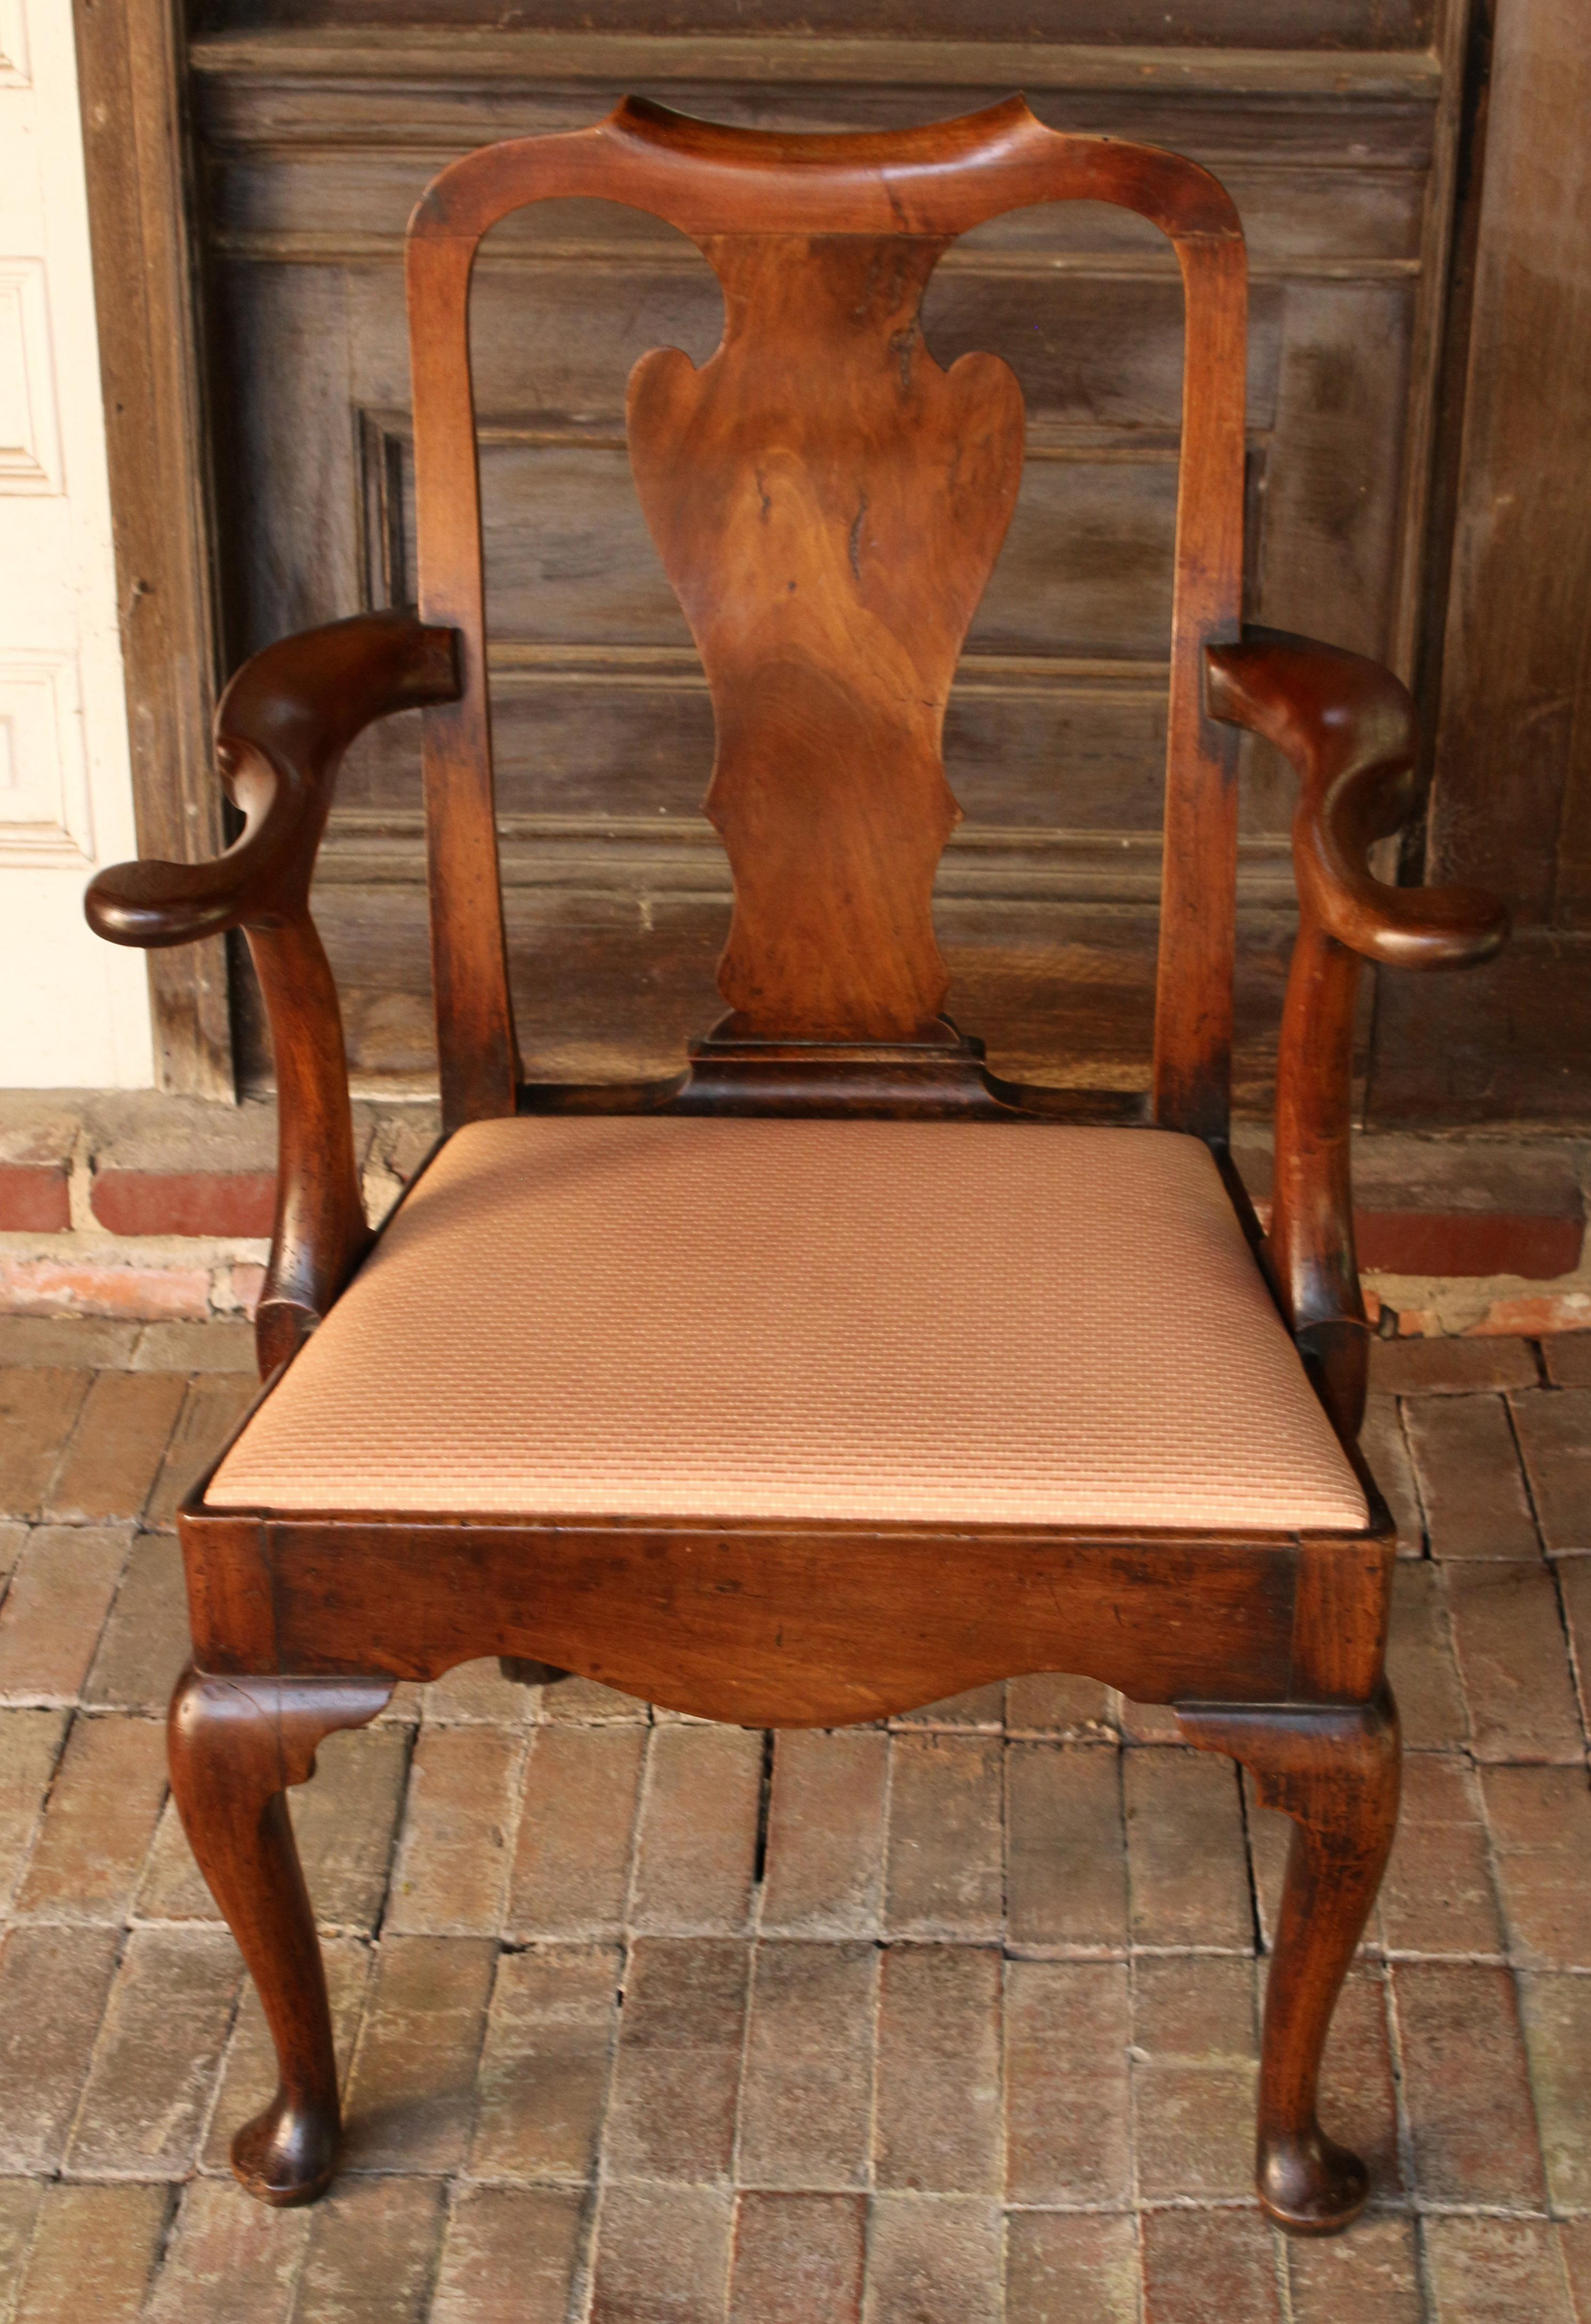 George I period walnut armchair, circa 1720-1730. Classically handsome, raised on cabriole legs with pad feet, bold & sculptural arms, well formed aprons. The chair shows good color with a fine old finish. Original seat blocks. Note how well the